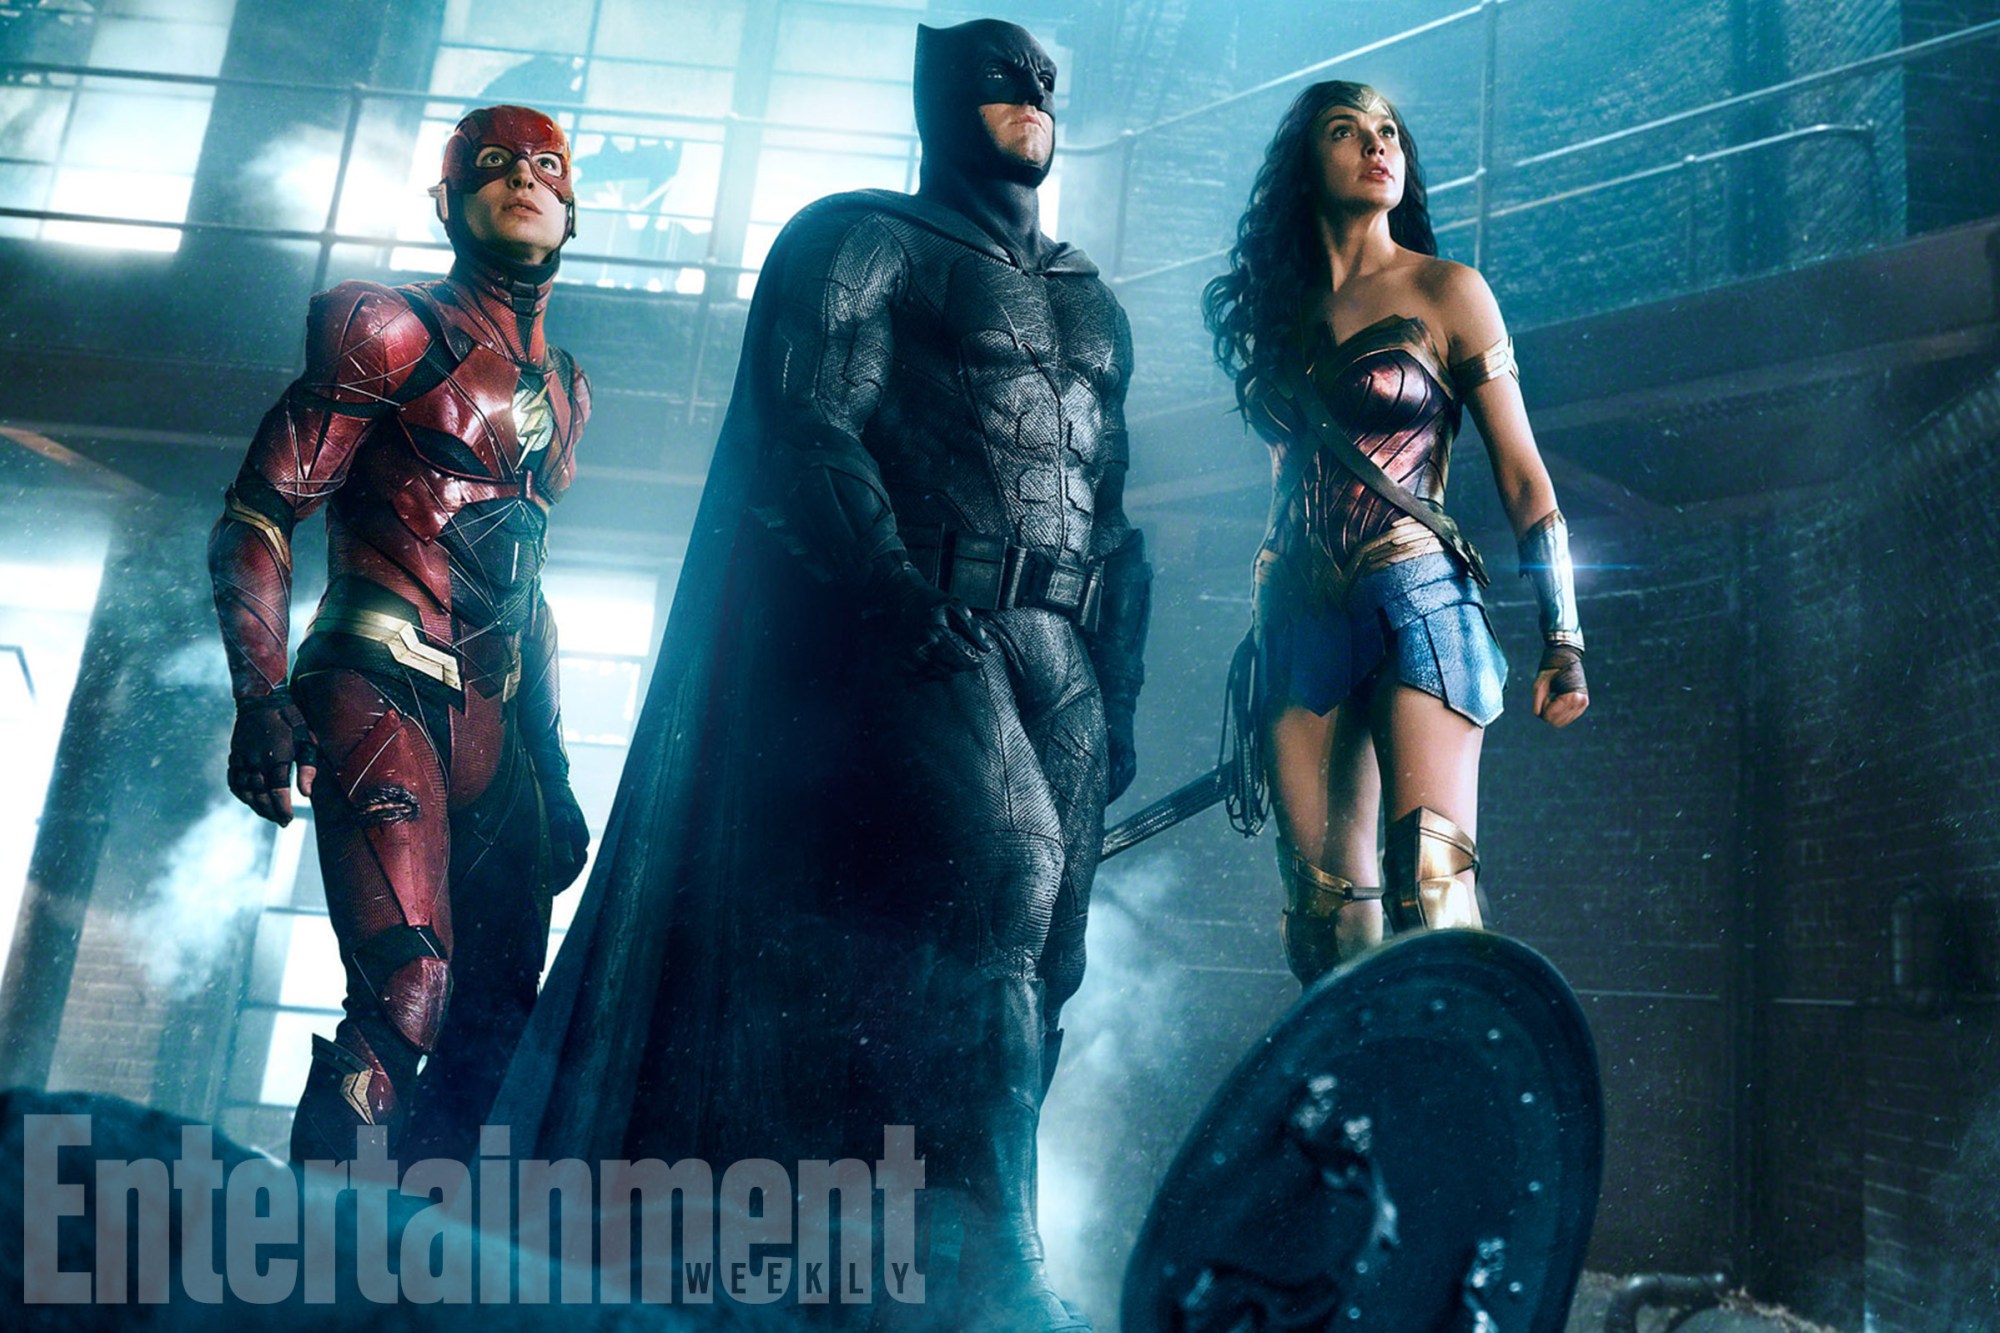 New 'Justice League' Photo Revealed!